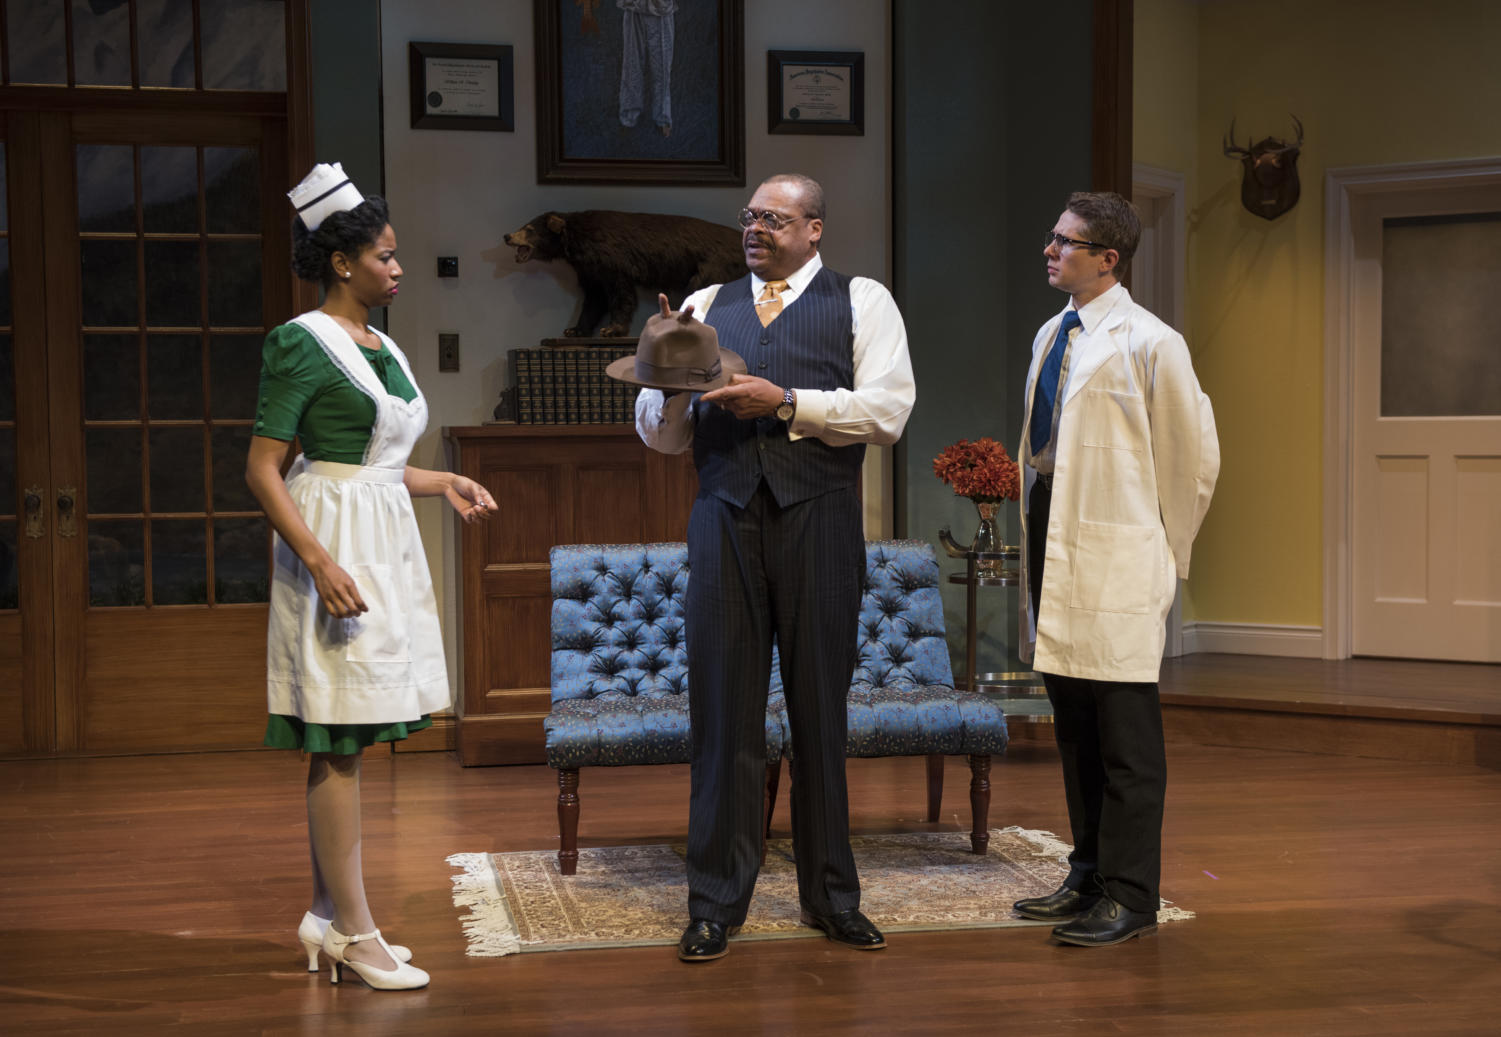 Nurse Miss Kelly (Jennifer Latimore), psychiatrist Dr. Chumley (A.C. Smith), and Dr. Sanderson (Erik Hellamn) discover what might be Harvey's hat.